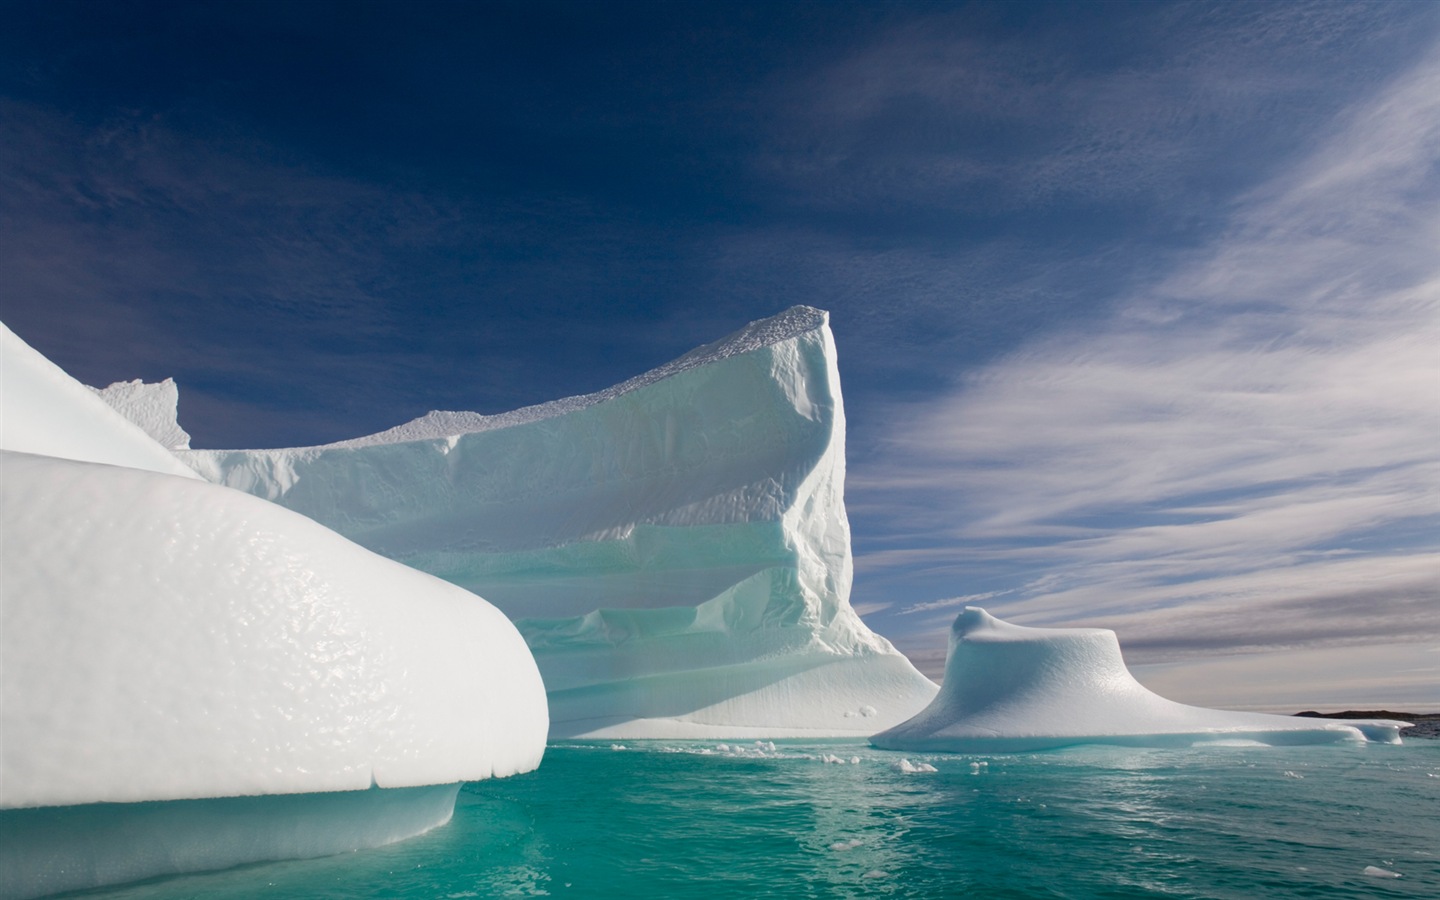 Windows 8 Wallpapers: Arctic, the nature ecological landscape, arctic animals #14 - 1440x900